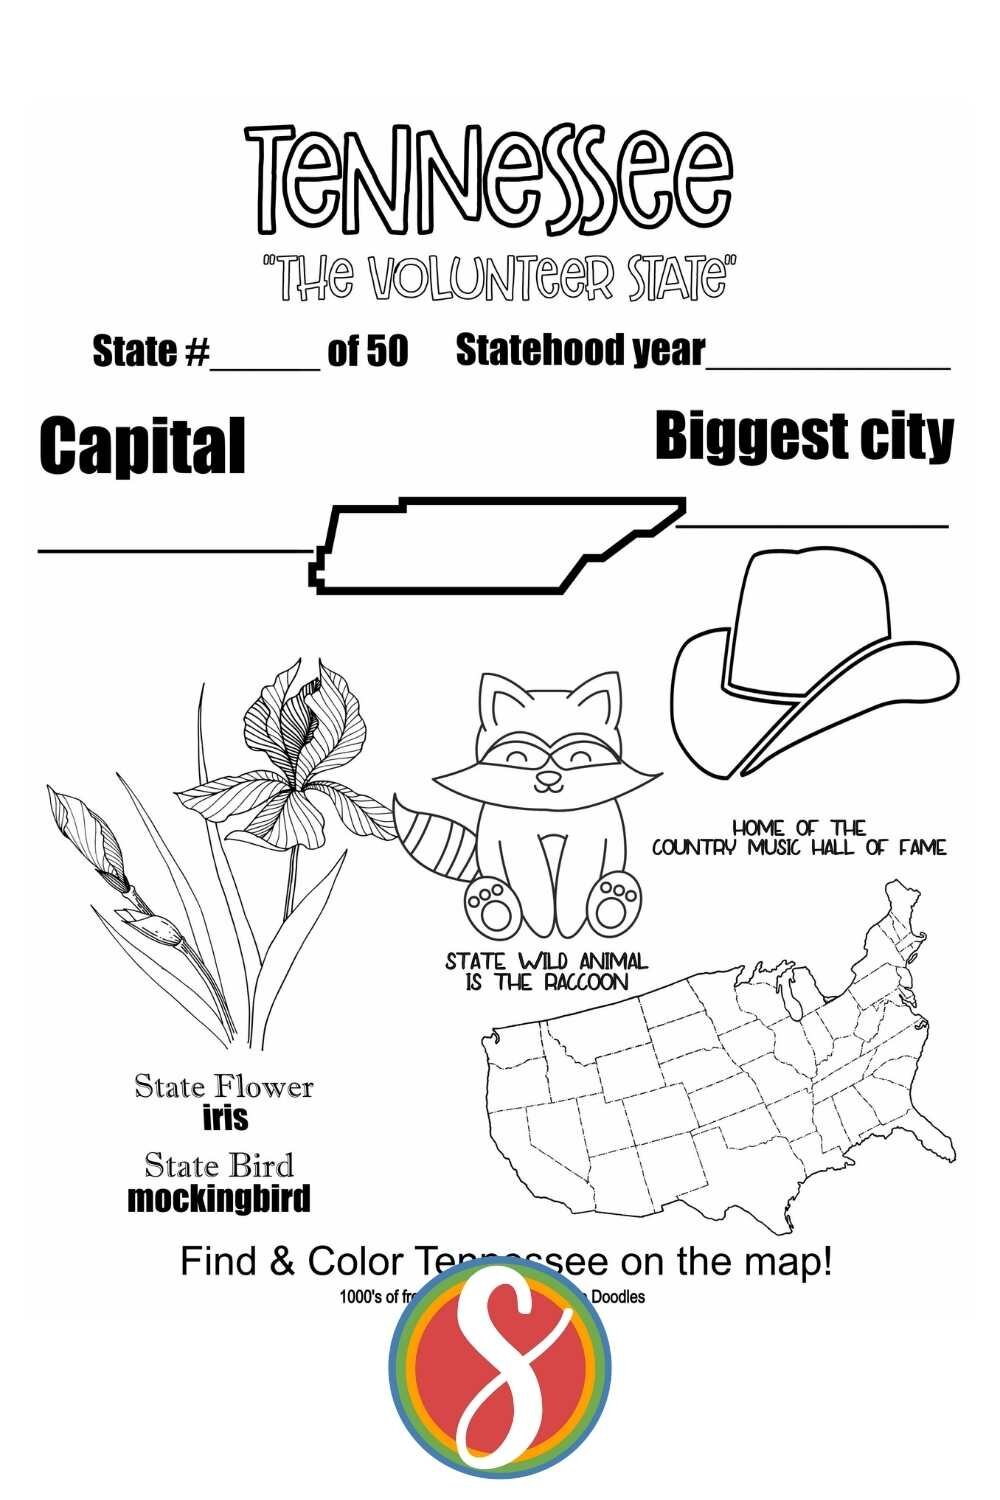 Tennessee  facts - a free activity coloring page about Tennessee from Stevie Doodles, free to print and color. Find 1000’s of free printable coloring sheets of all kinds at Stevie Doodles